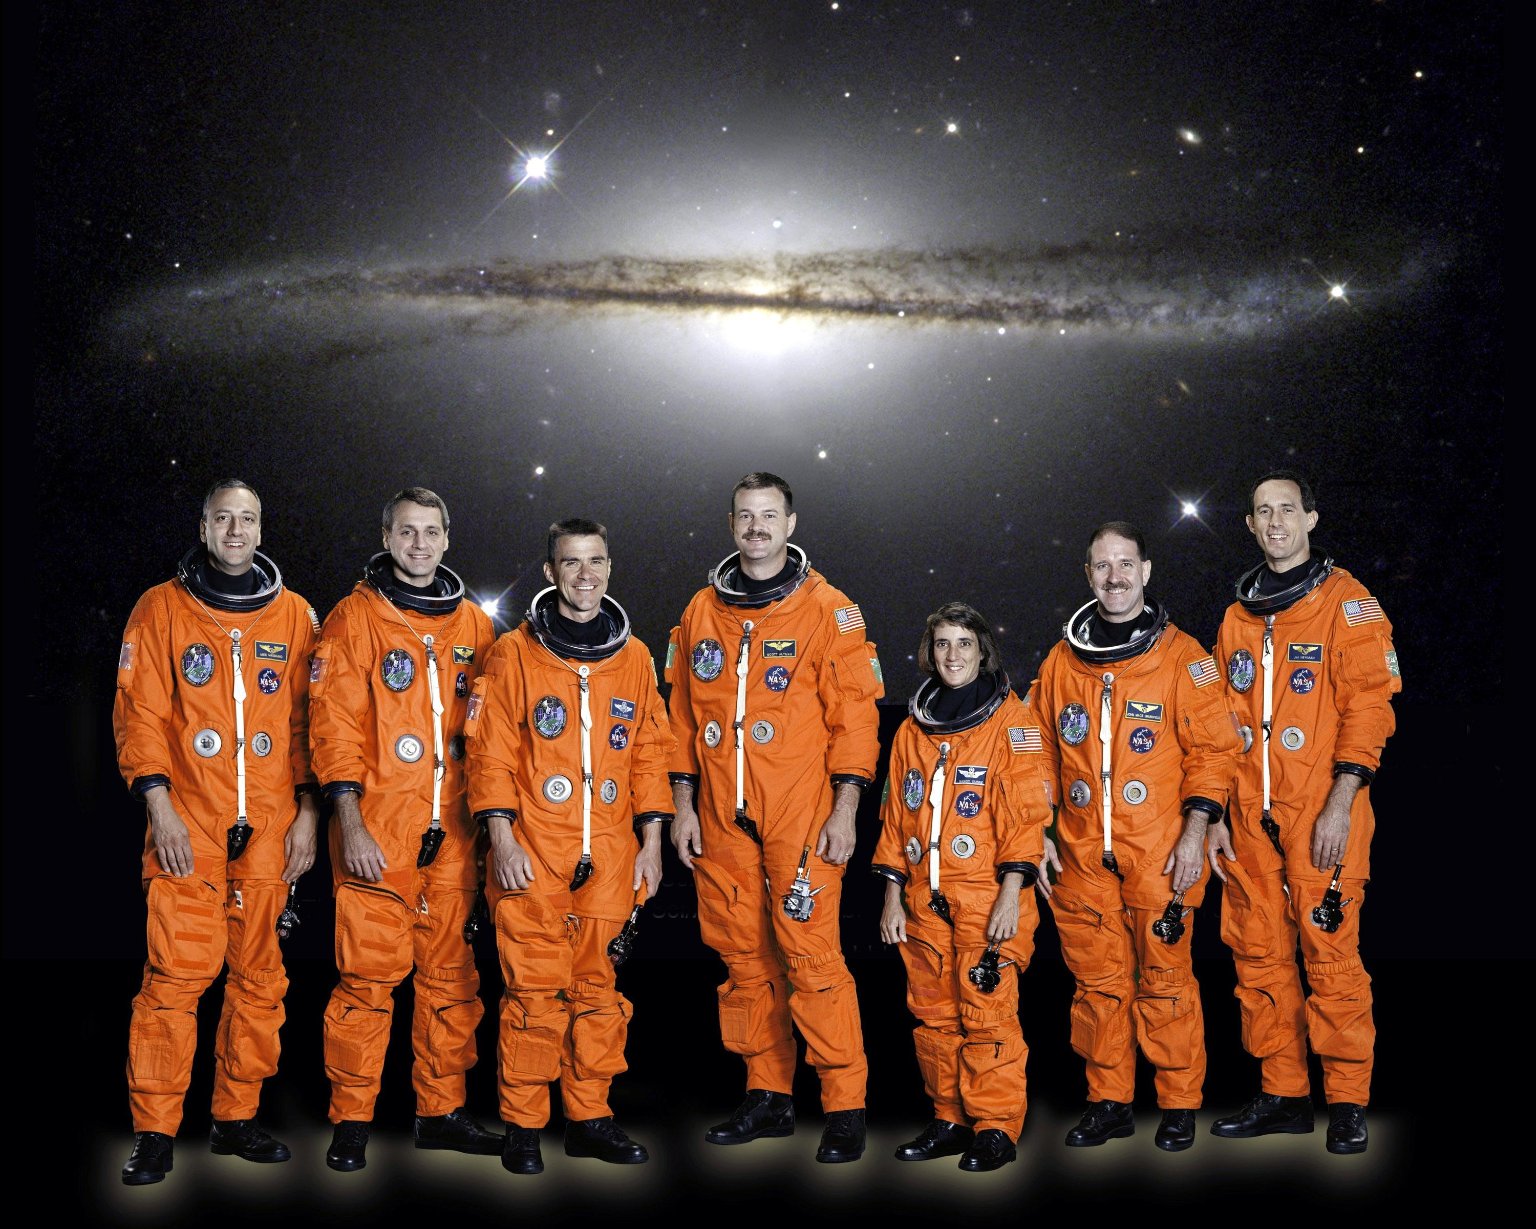 Six men and one woman in flight suits, no helmets, standing in front of a backdrop of a galaxy image.